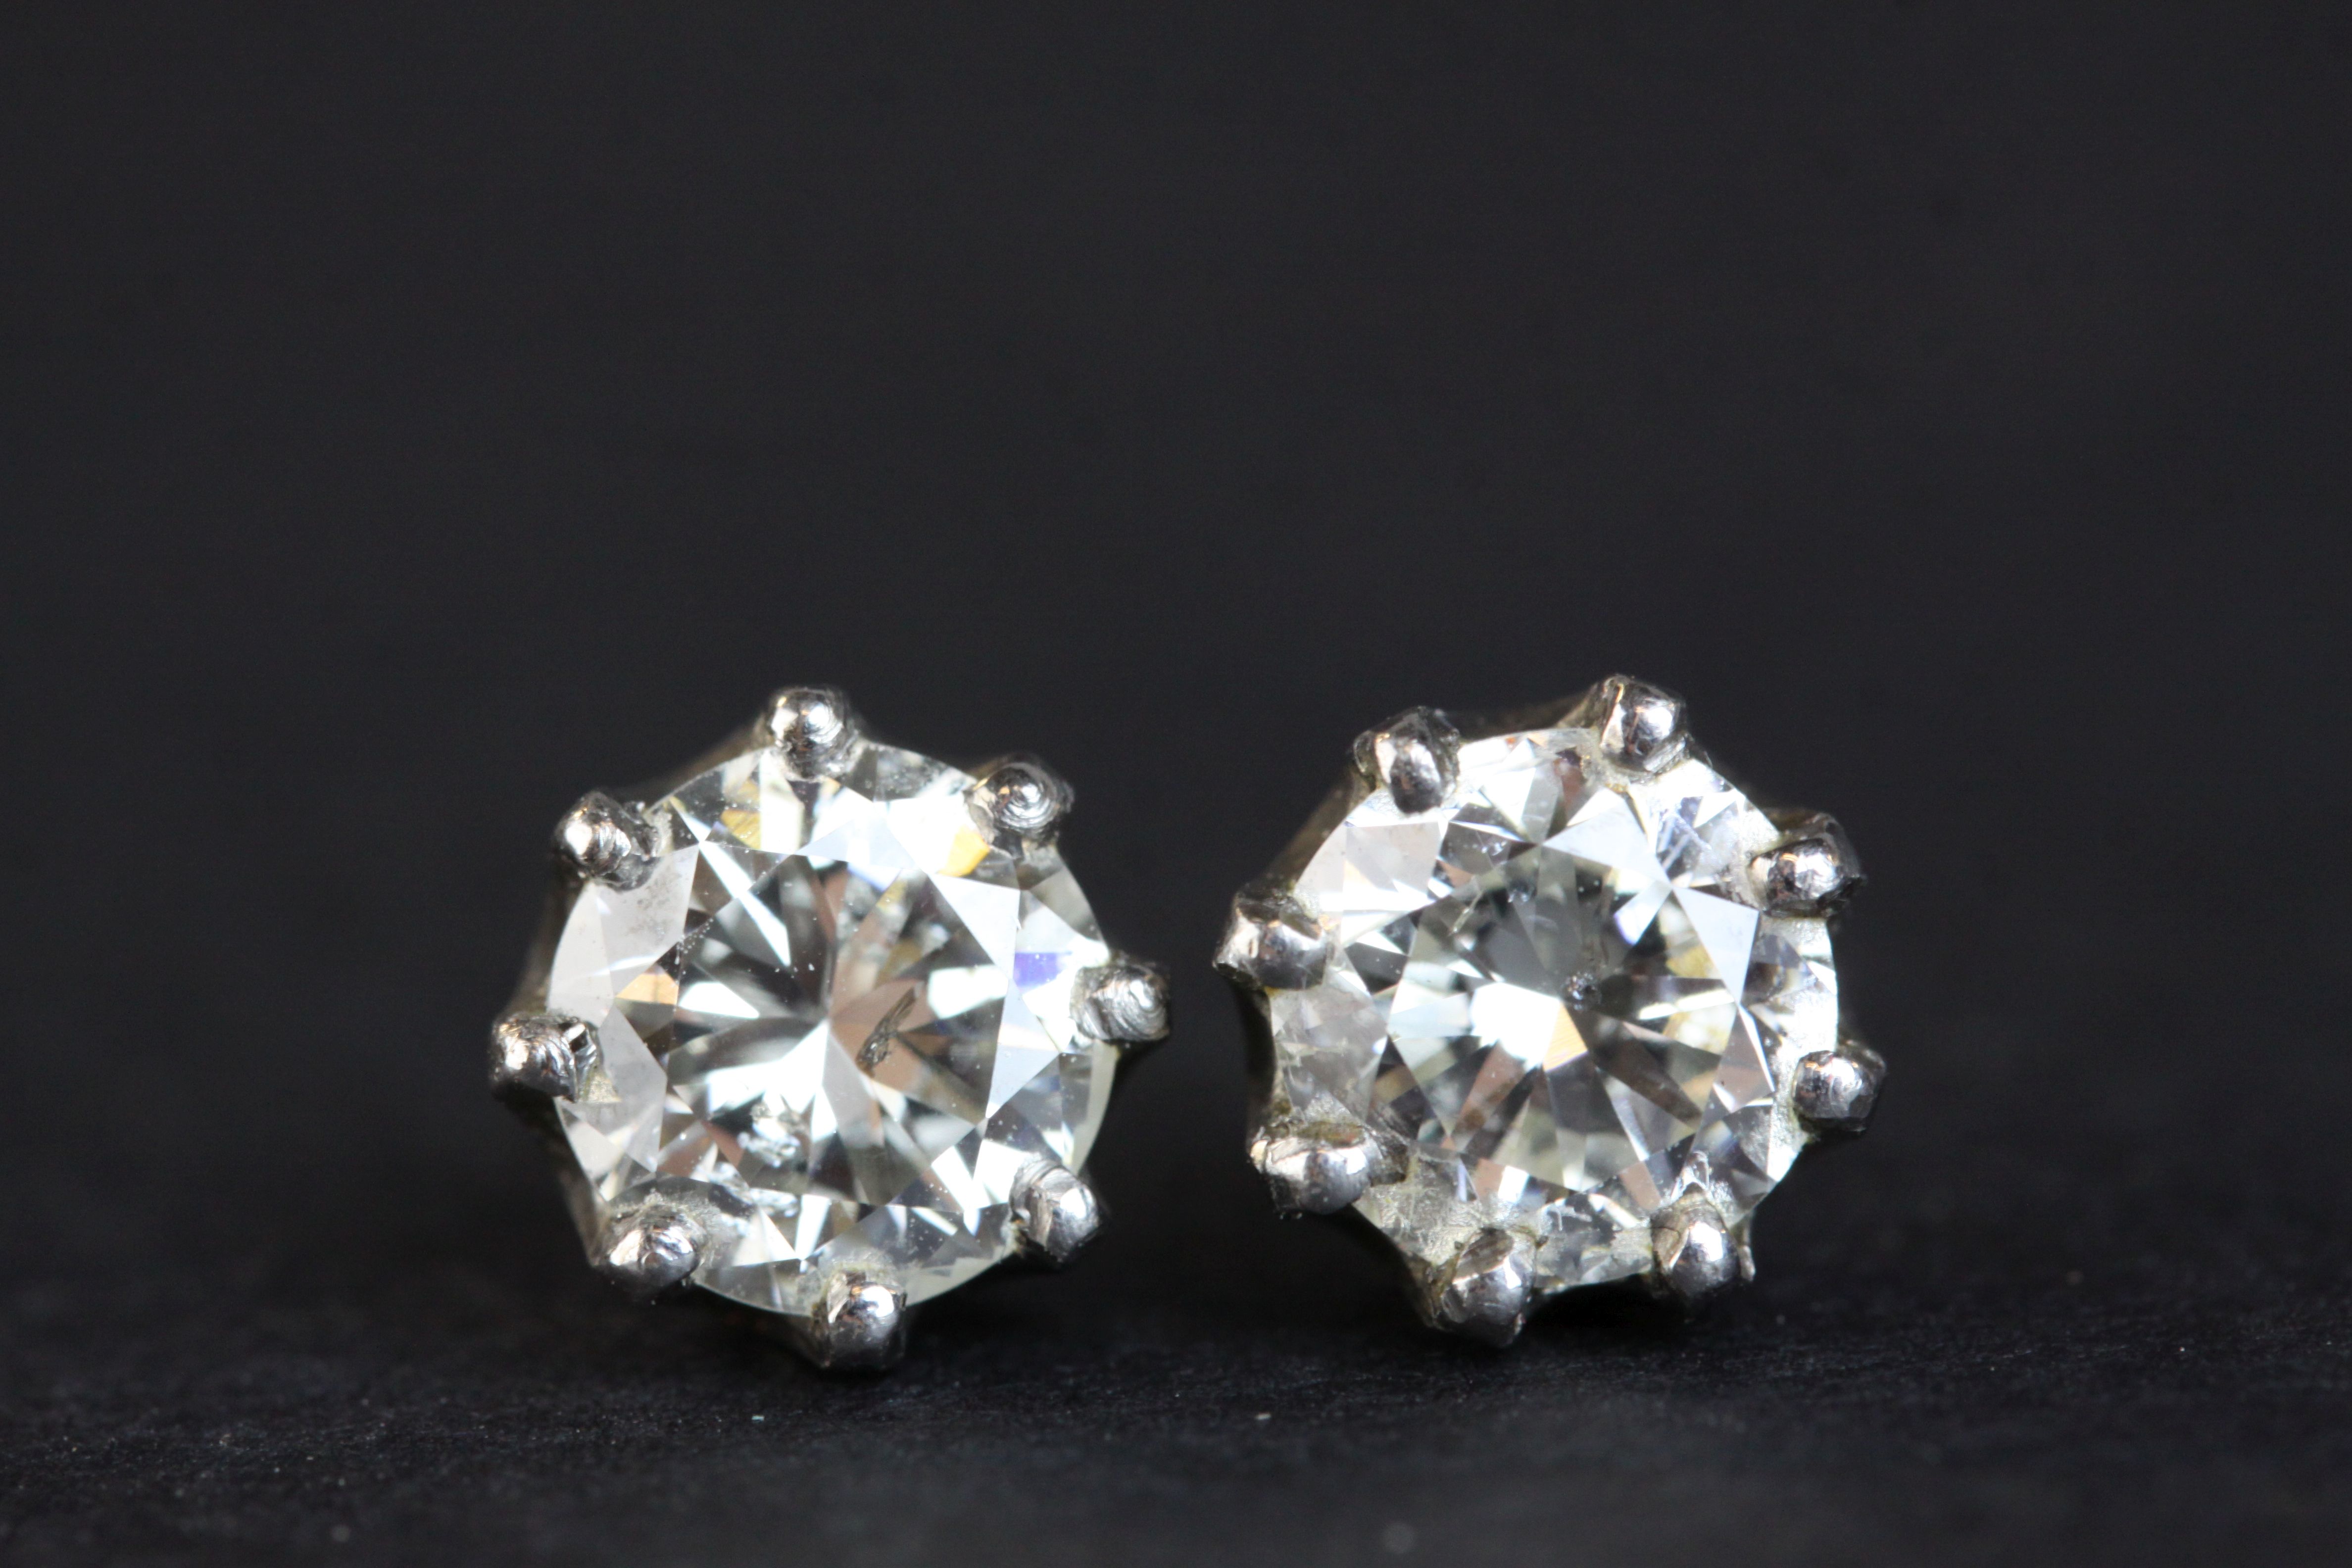 Pair of diamond solitaire stud earrings, each round brilliant cut diamond weighing approx 1.0 carat, - Image 5 of 8